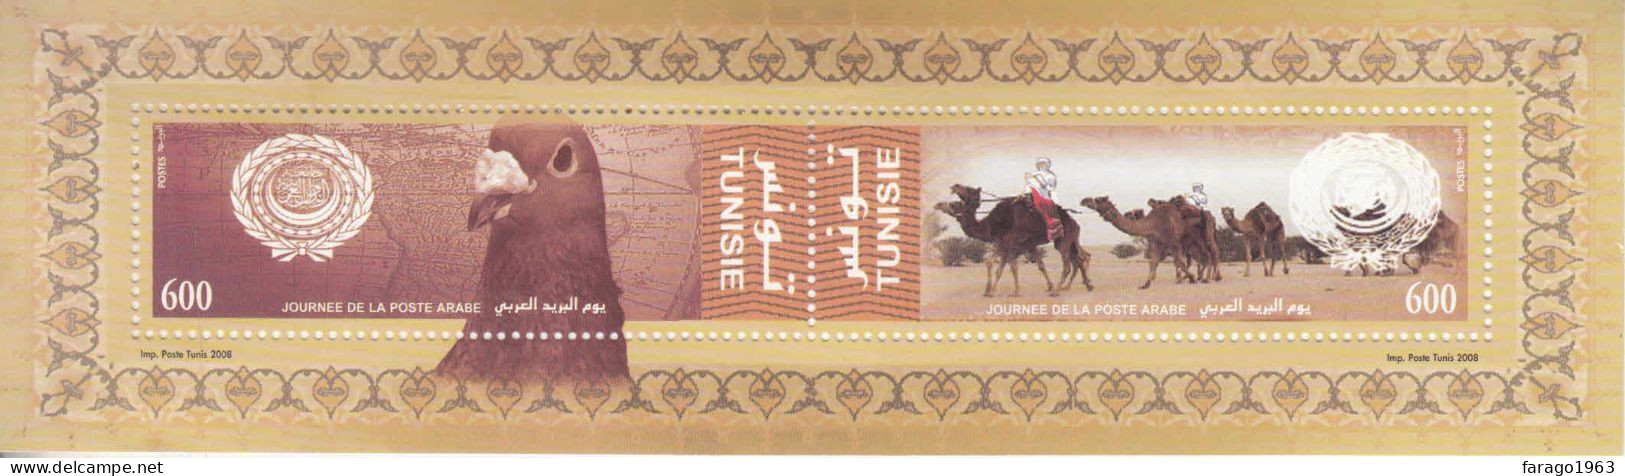 2008 Tunisia Arab Post Day Camels Pigeon JOINT ISSUE Souvenir Sheet MNH - Tunesië (1956-...)